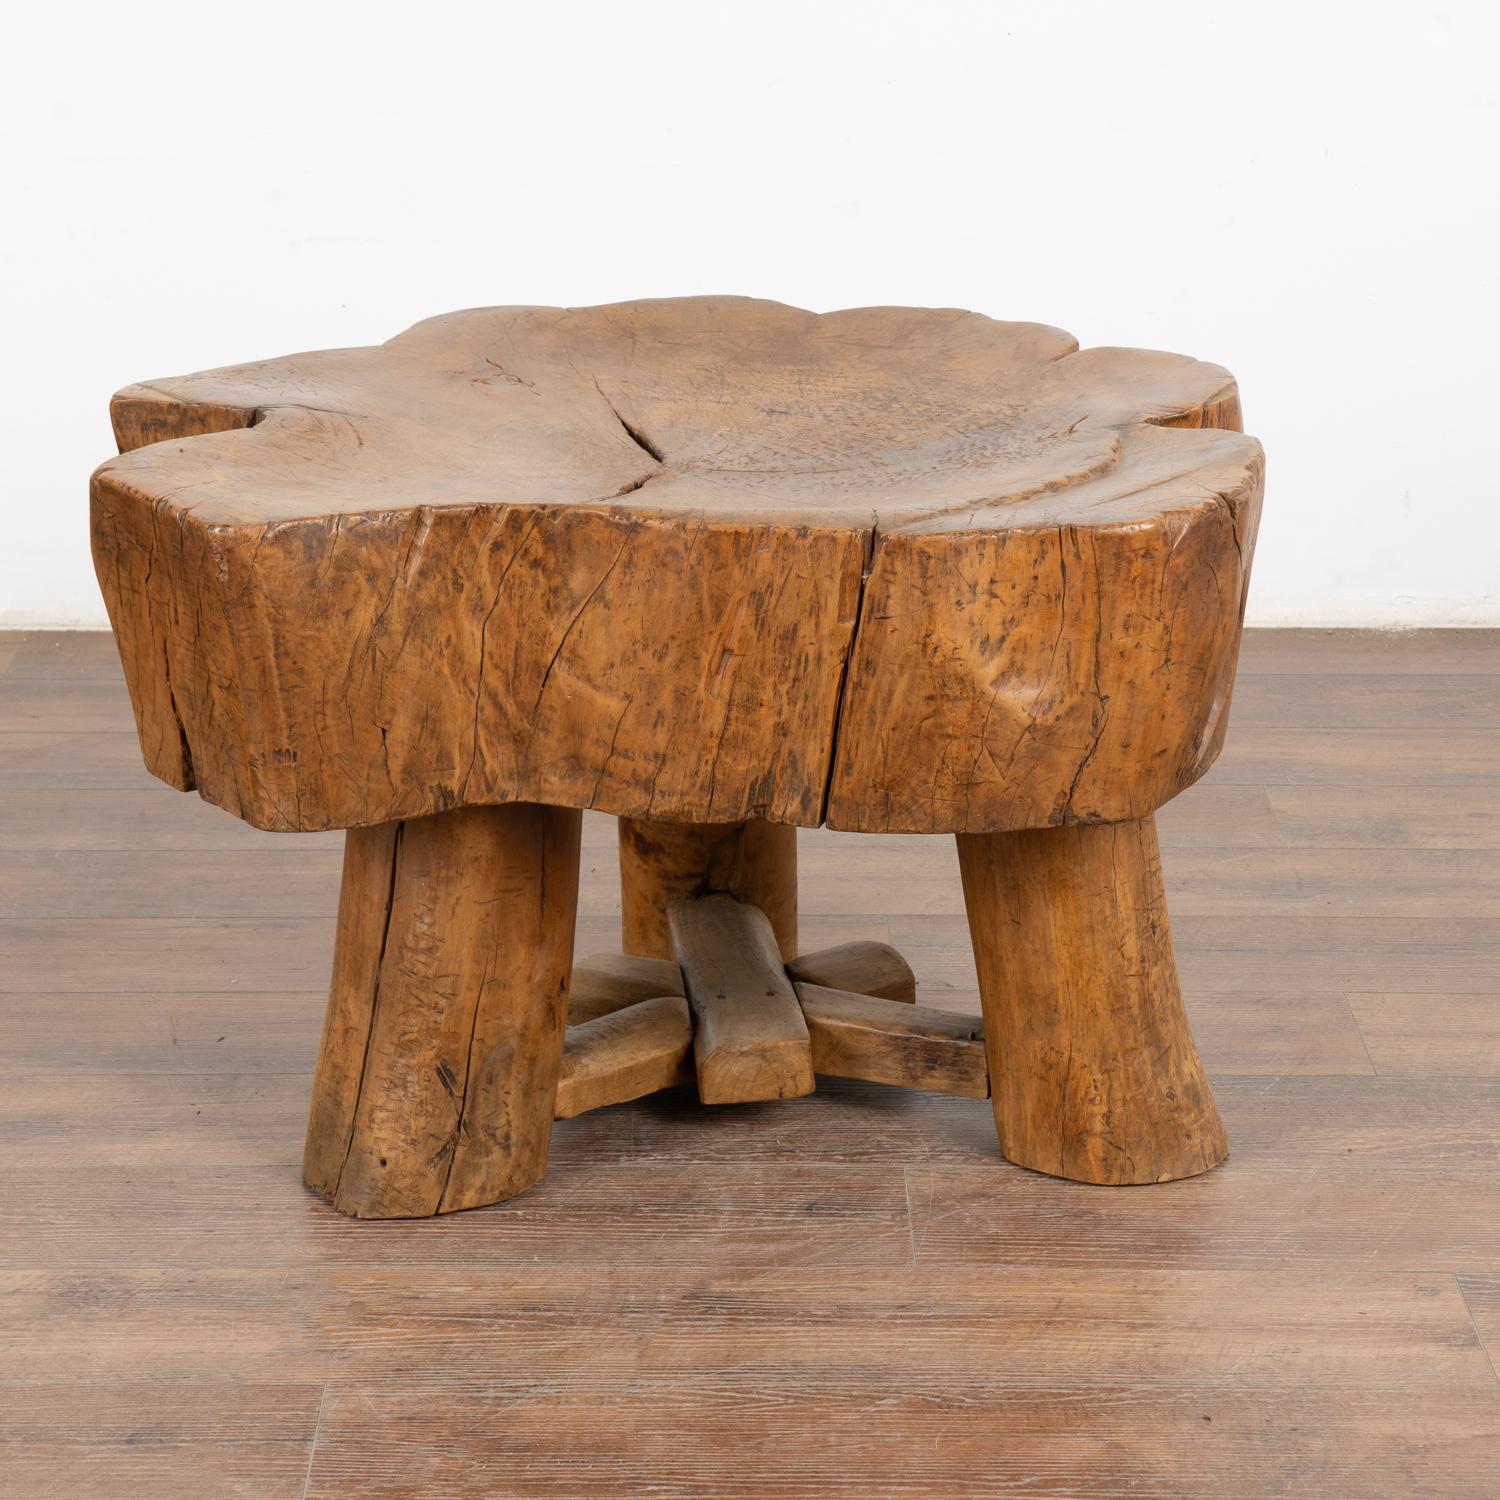 The incredible appeal of this impressive coffee table comes from the wood itself which is aged, thick and rugged. Every crack, nick and separation add to the depth of character in this rustic table with a strong organic feel. 
The 9